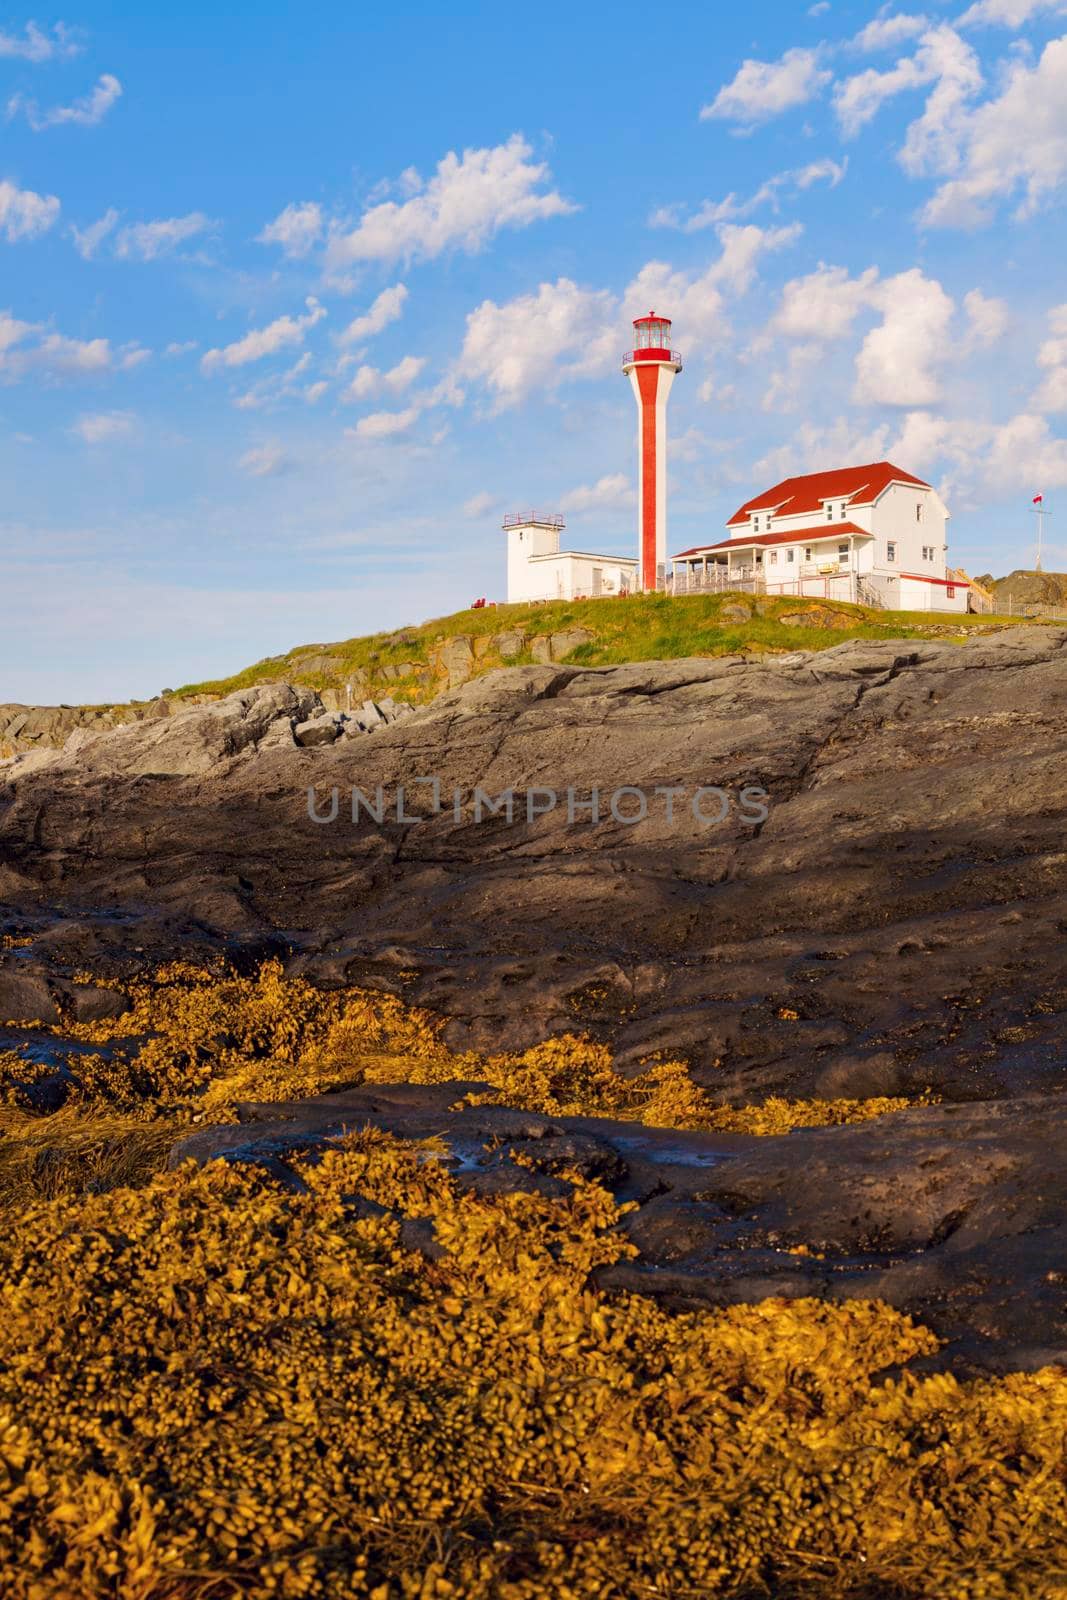 Cape Forchu Lighthouse seen in the morning. Nova Scotia, Canada.